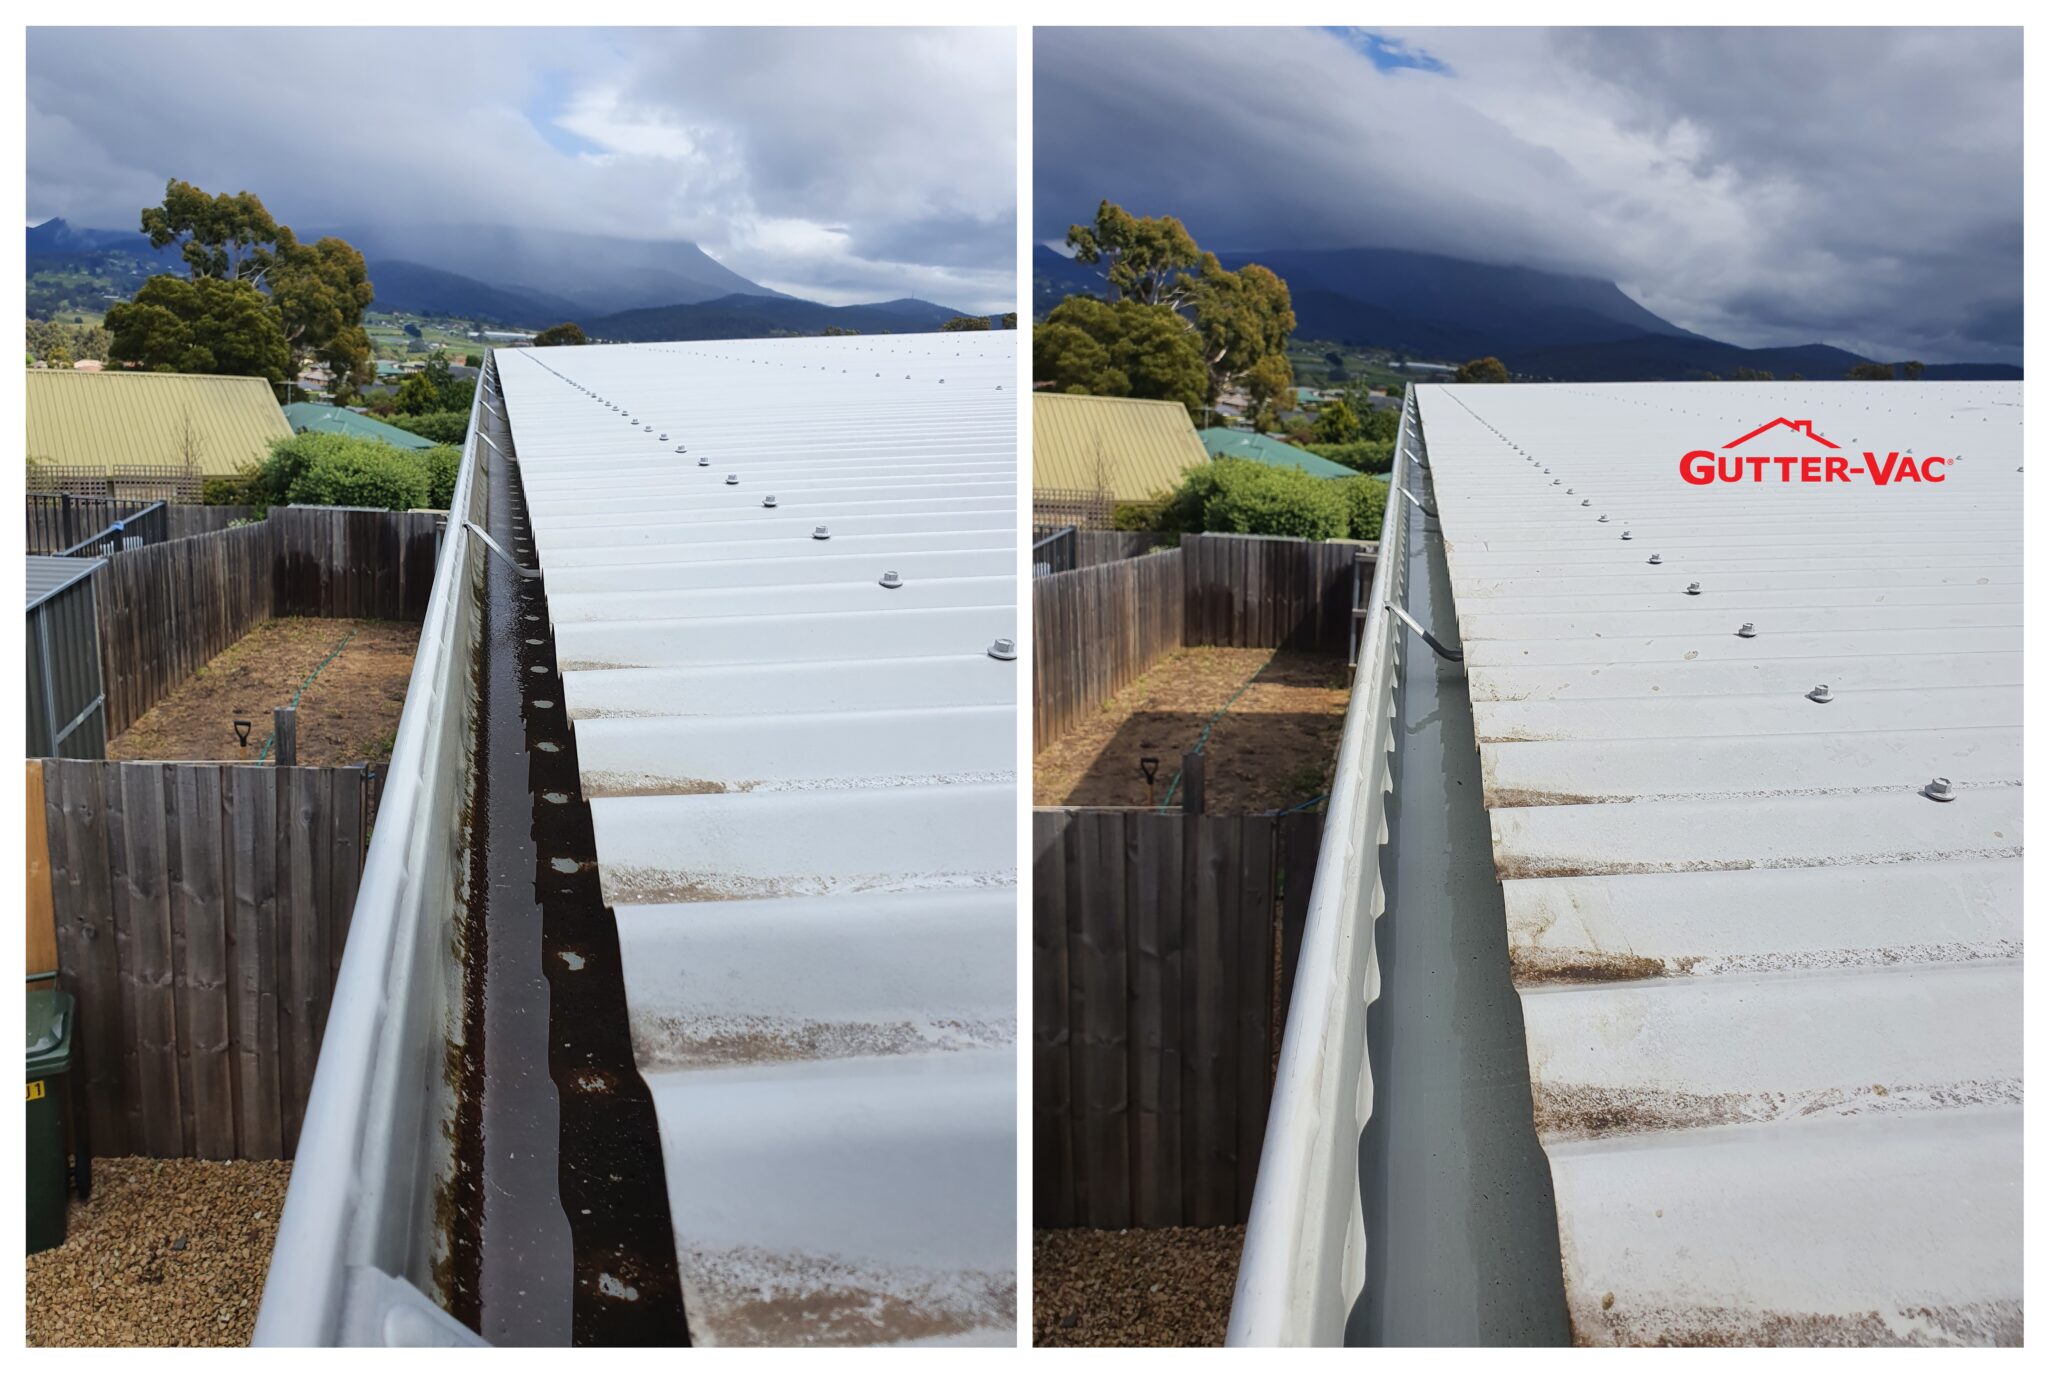 Clouds Rolling in, Have You Cleaned Your Gutters Yet?